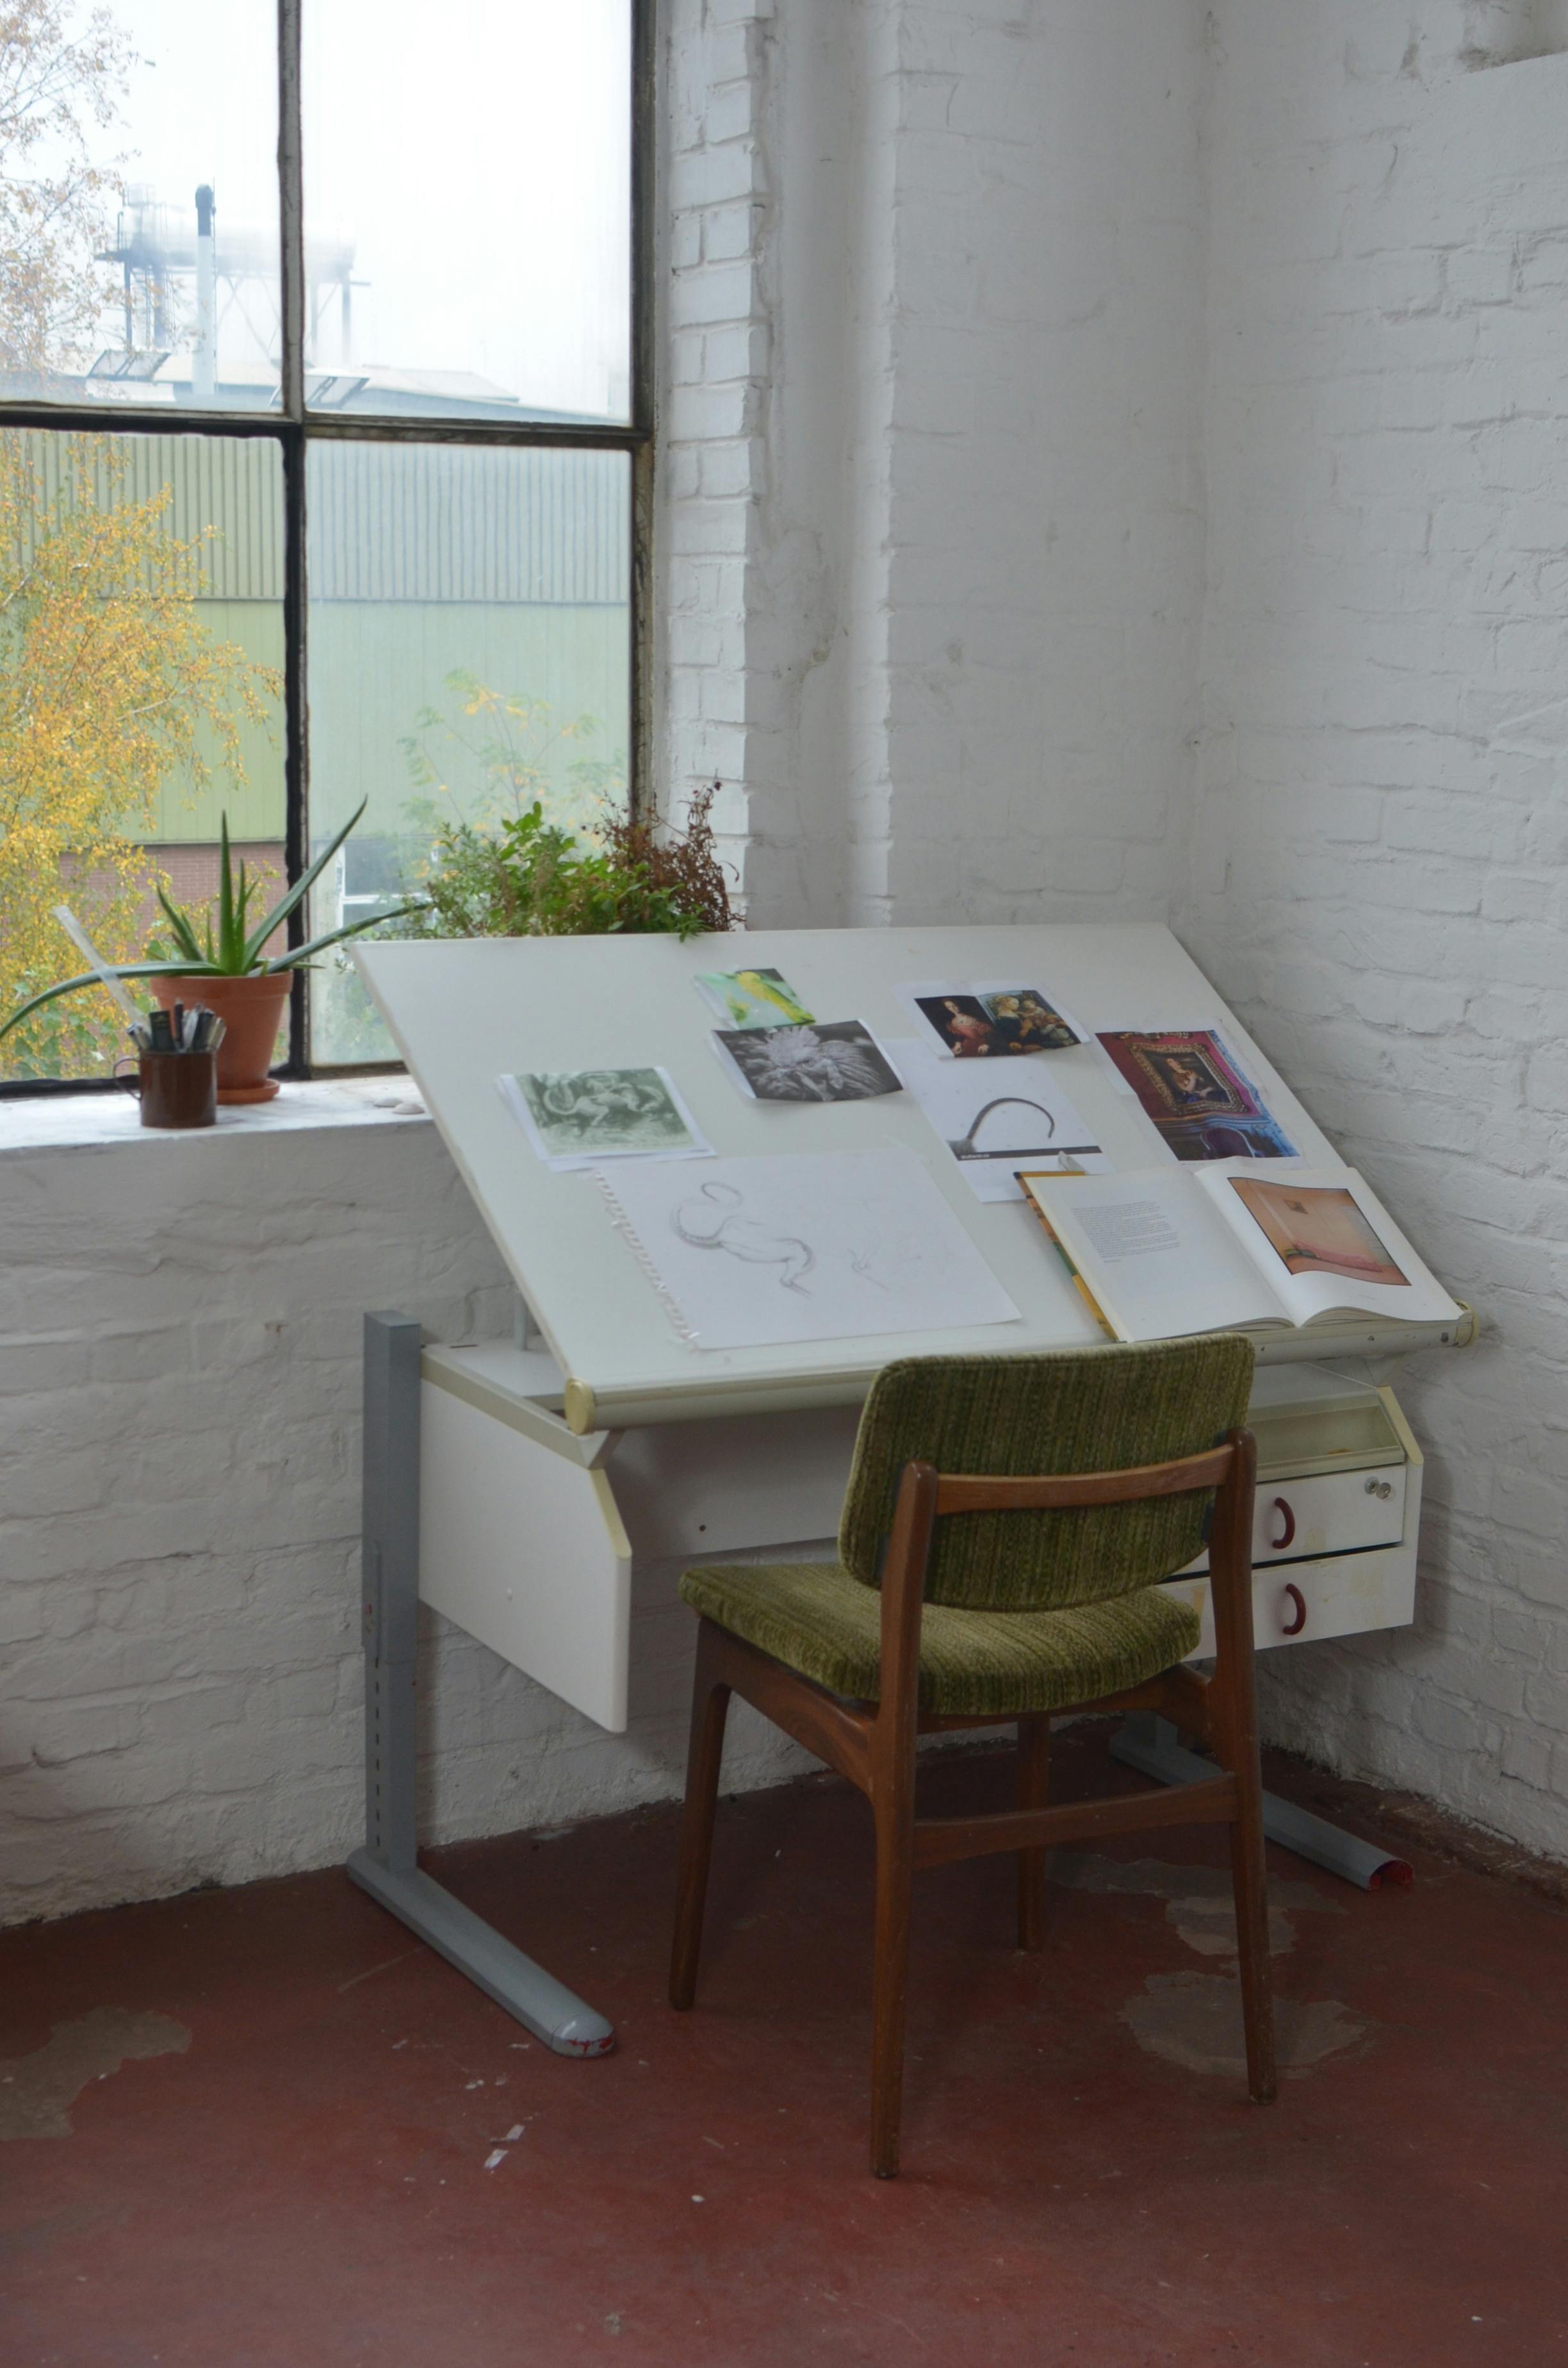 chair placed near window and table with drawings